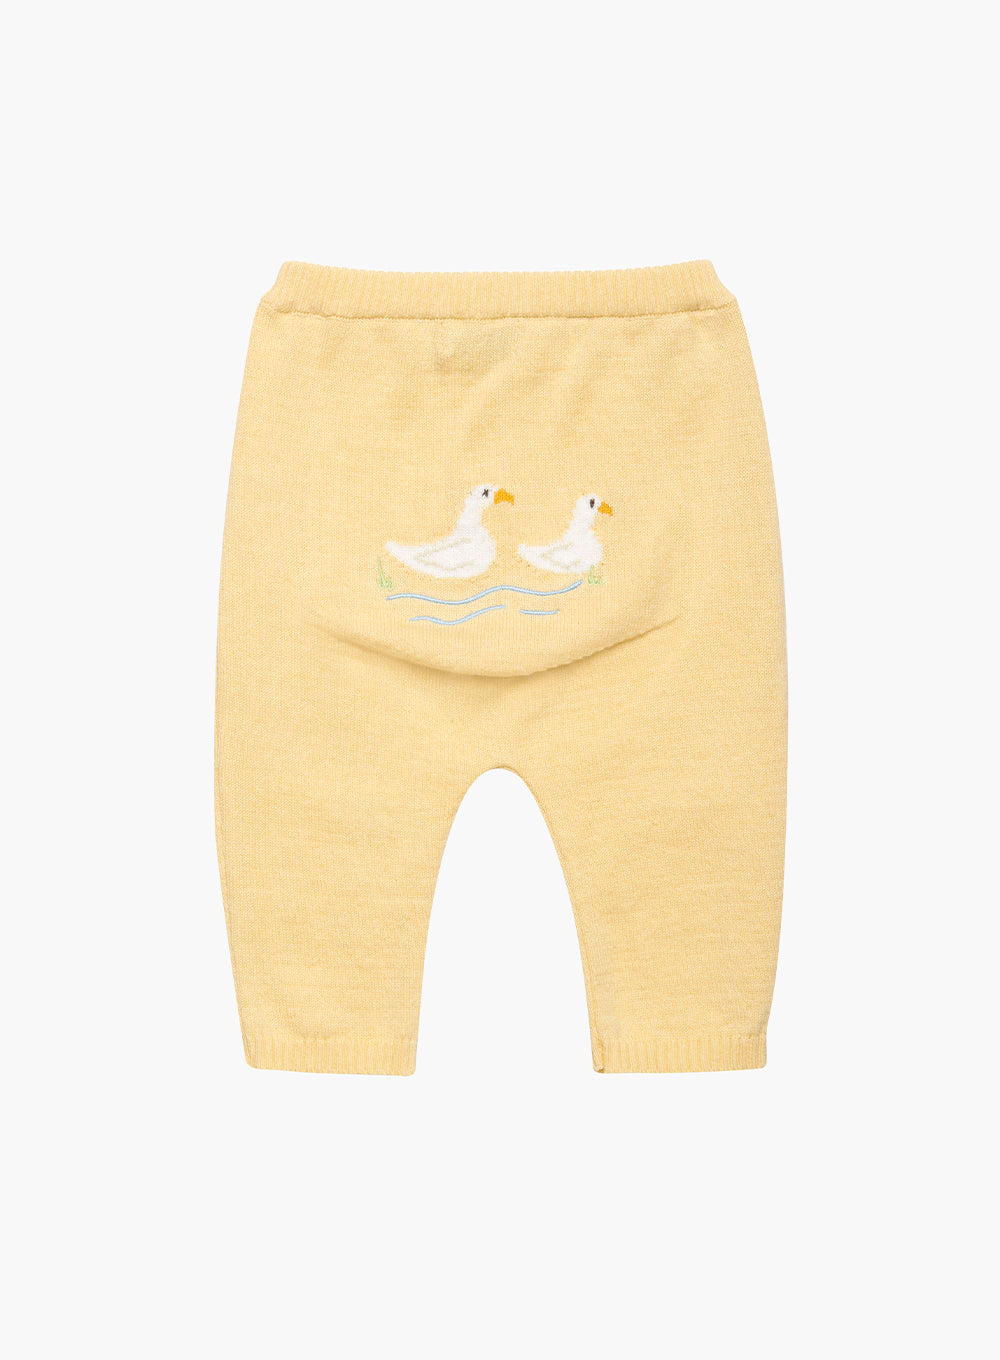 Bloomers Plastic Pants with Short Legs (PB263) €36.00